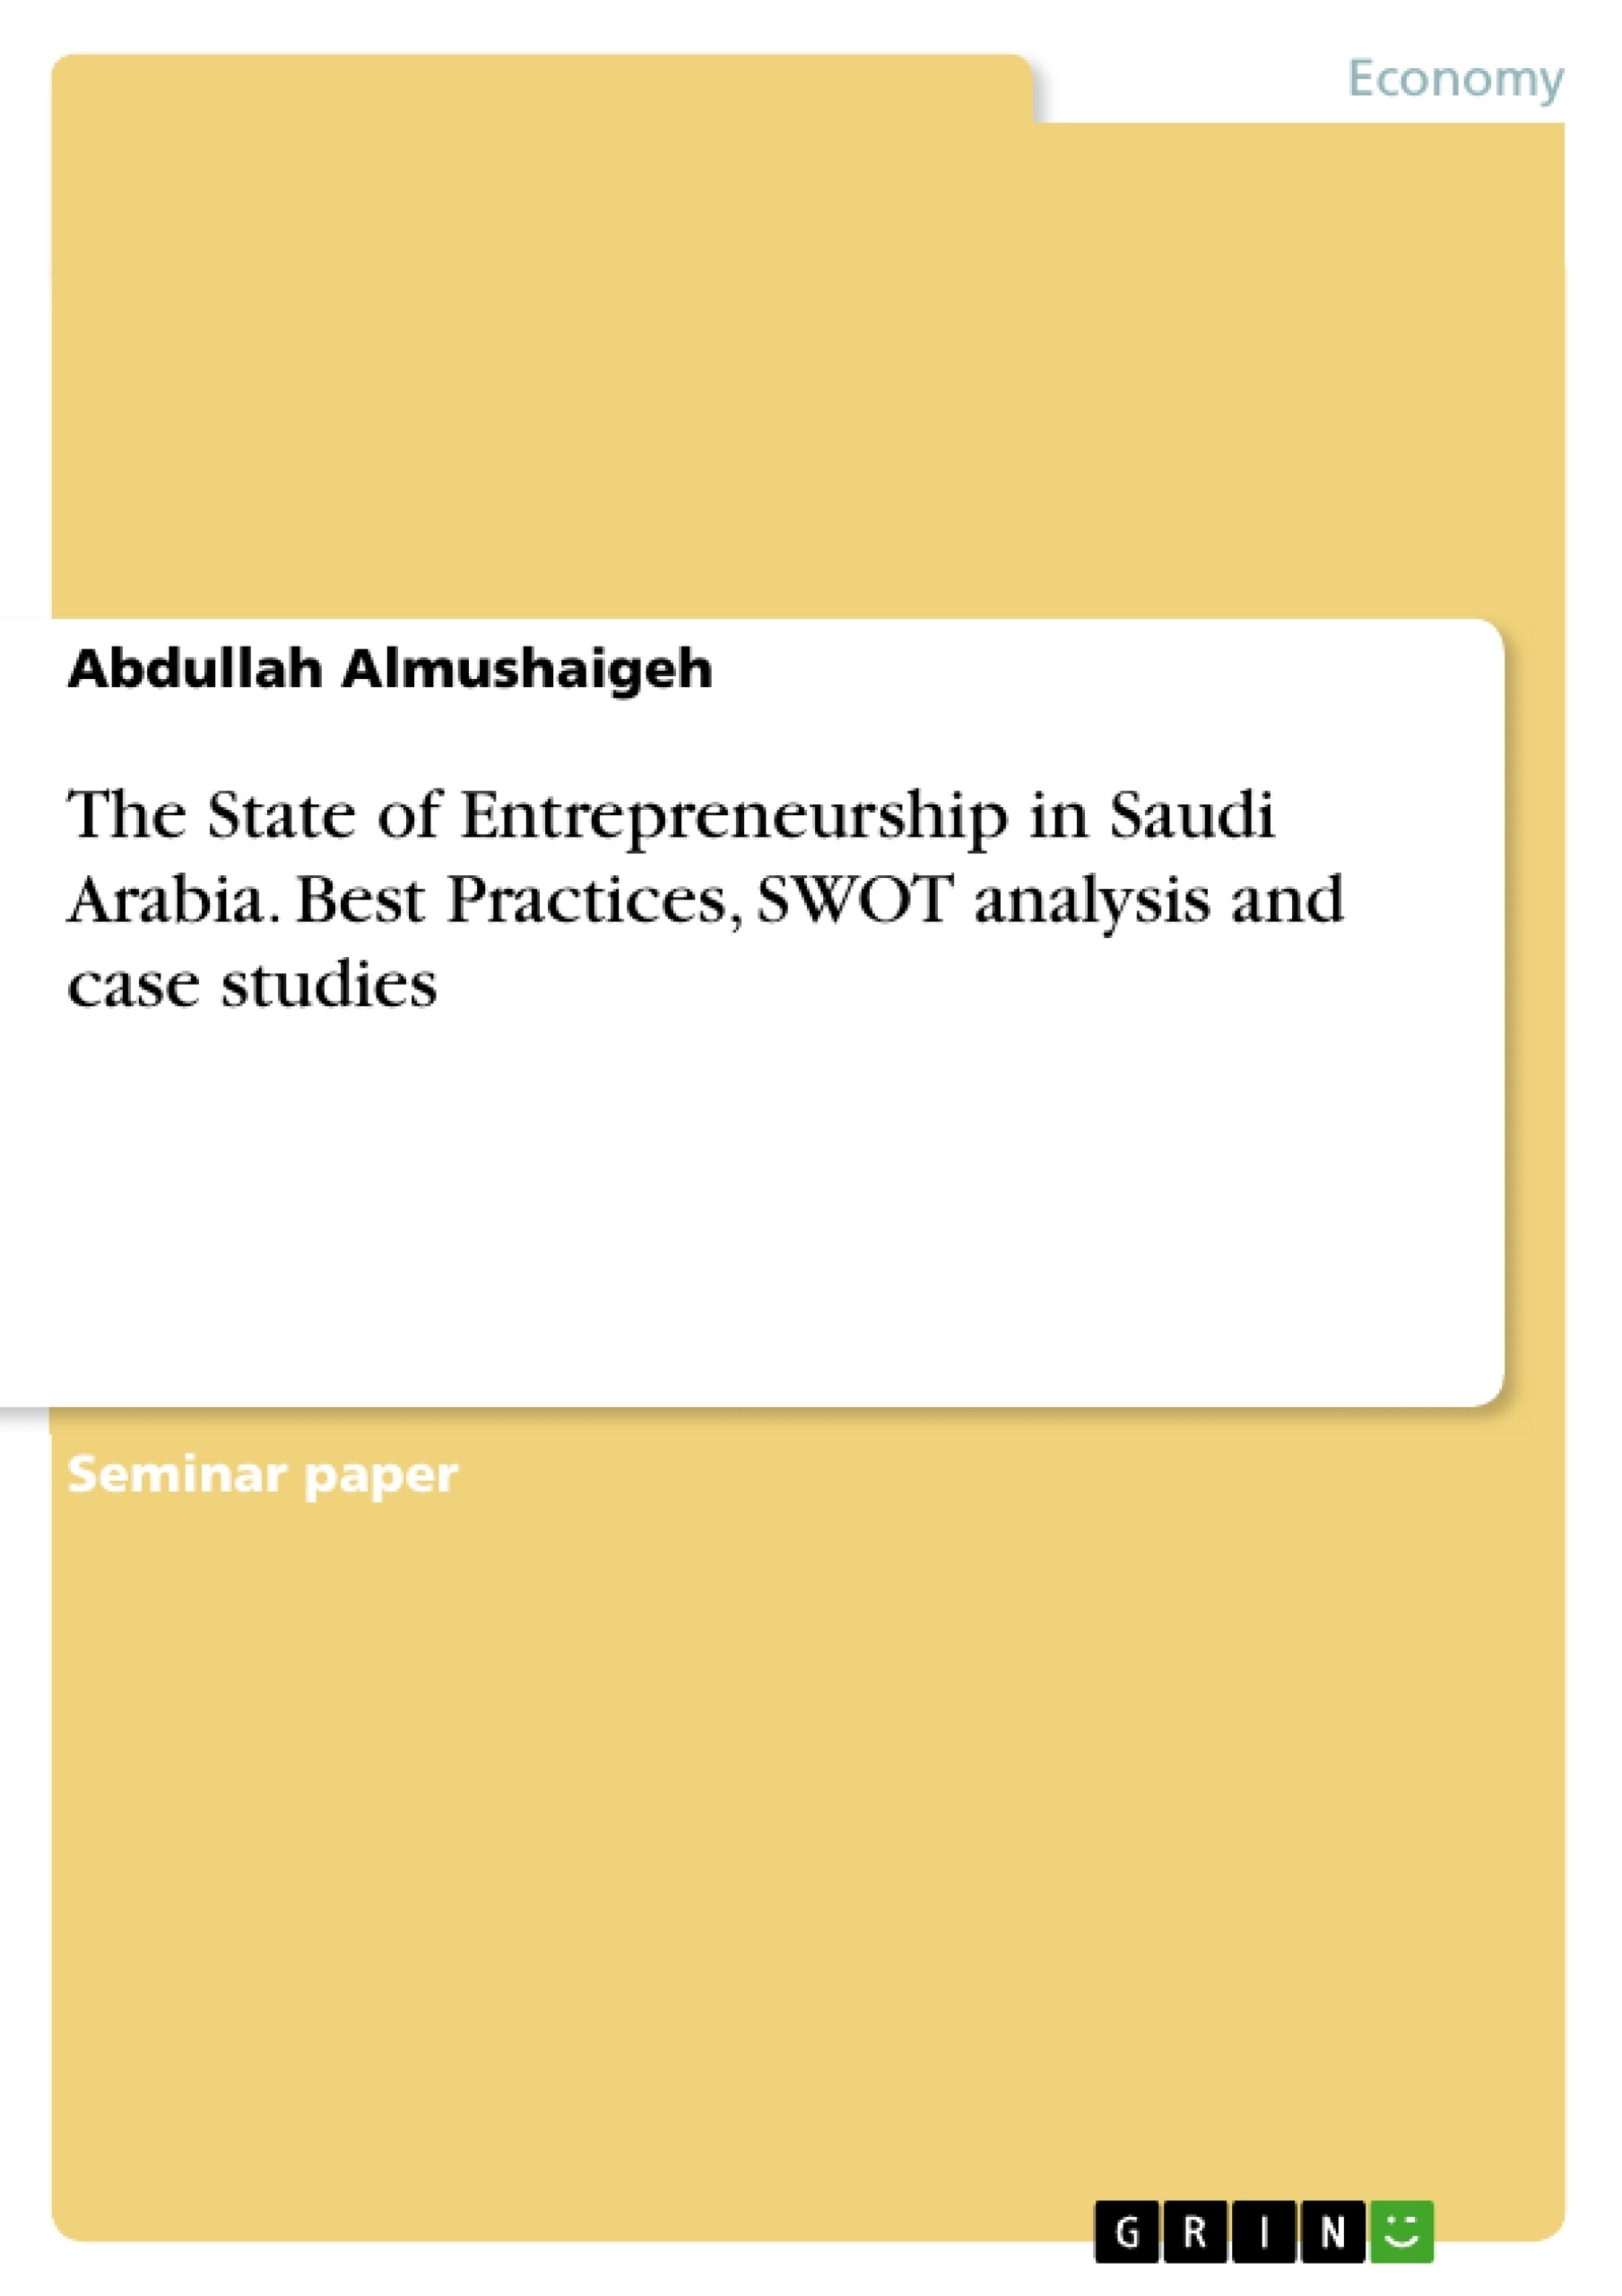 Titel: The State of Entrepreneurship in Saudi Arabia. Best Practices, SWOT analysis and case studies